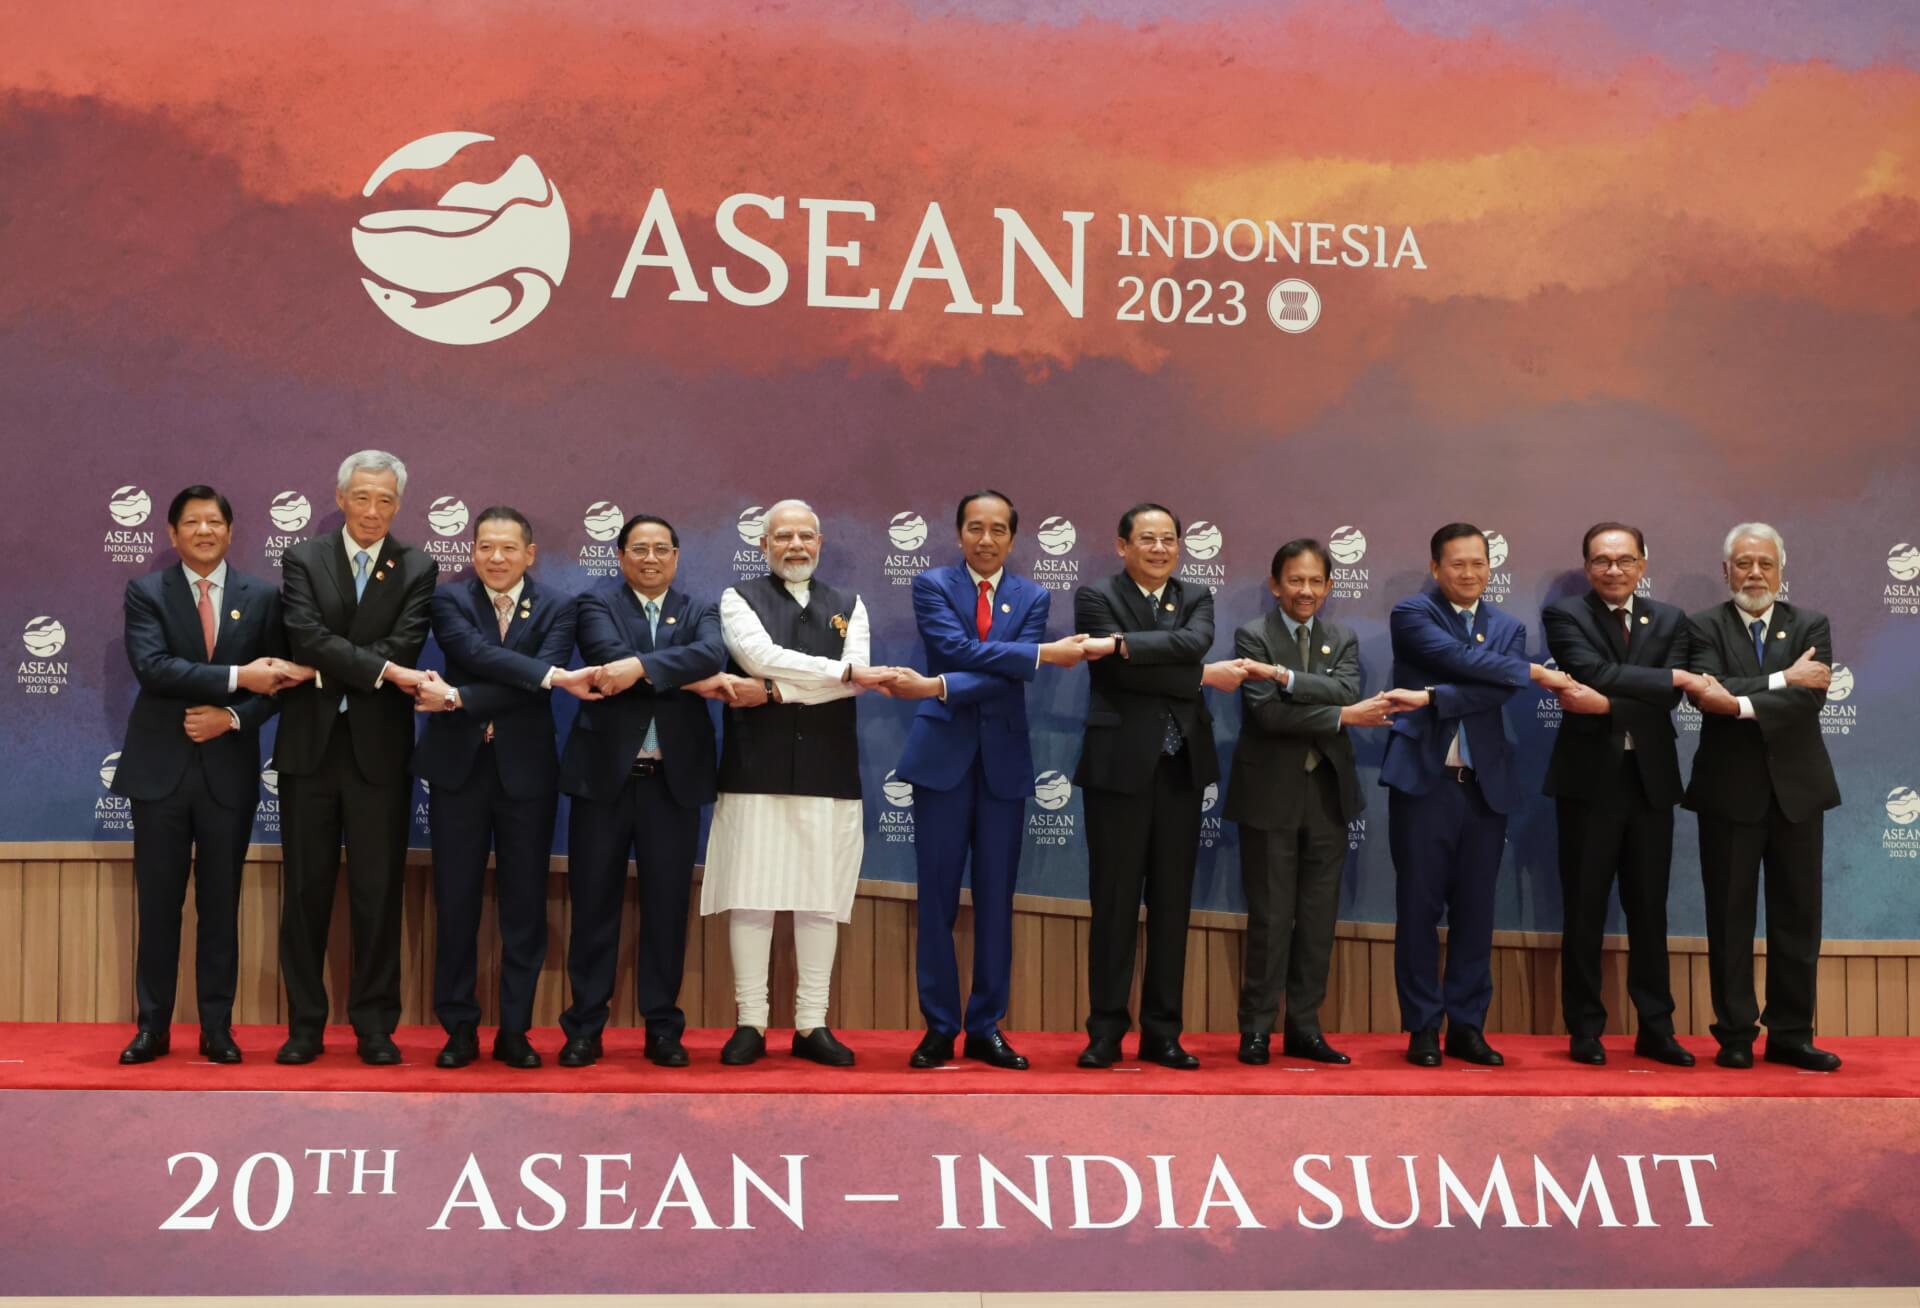 ASEAN a “Central Pillar” of India’s Act-East Policy: PM Modi